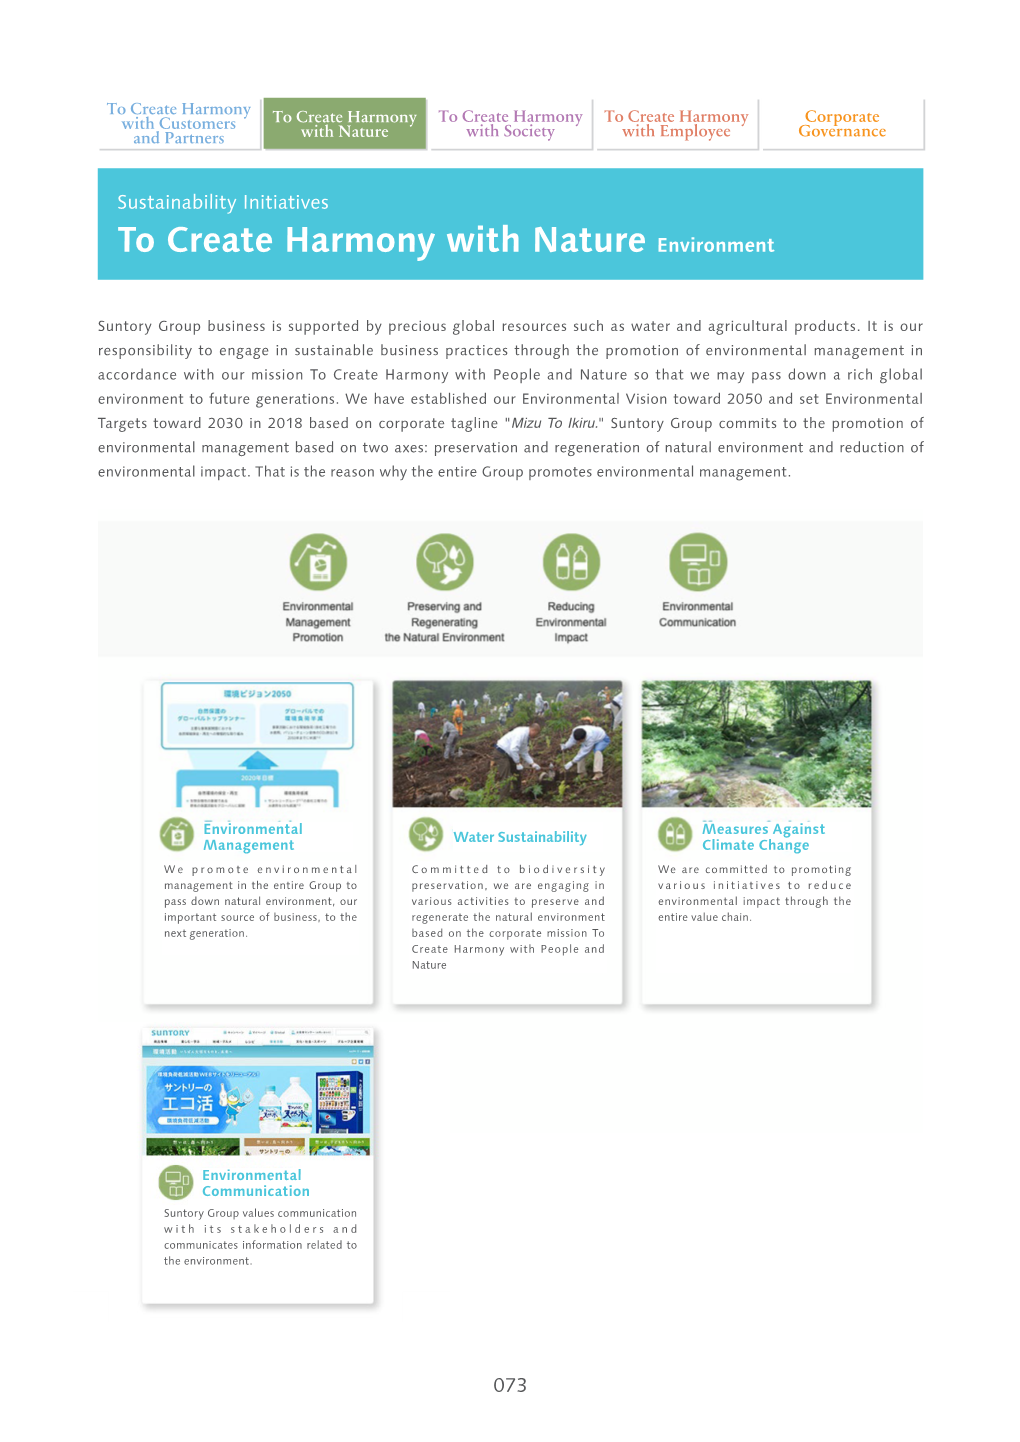 To Create Harmony with Nature Environment